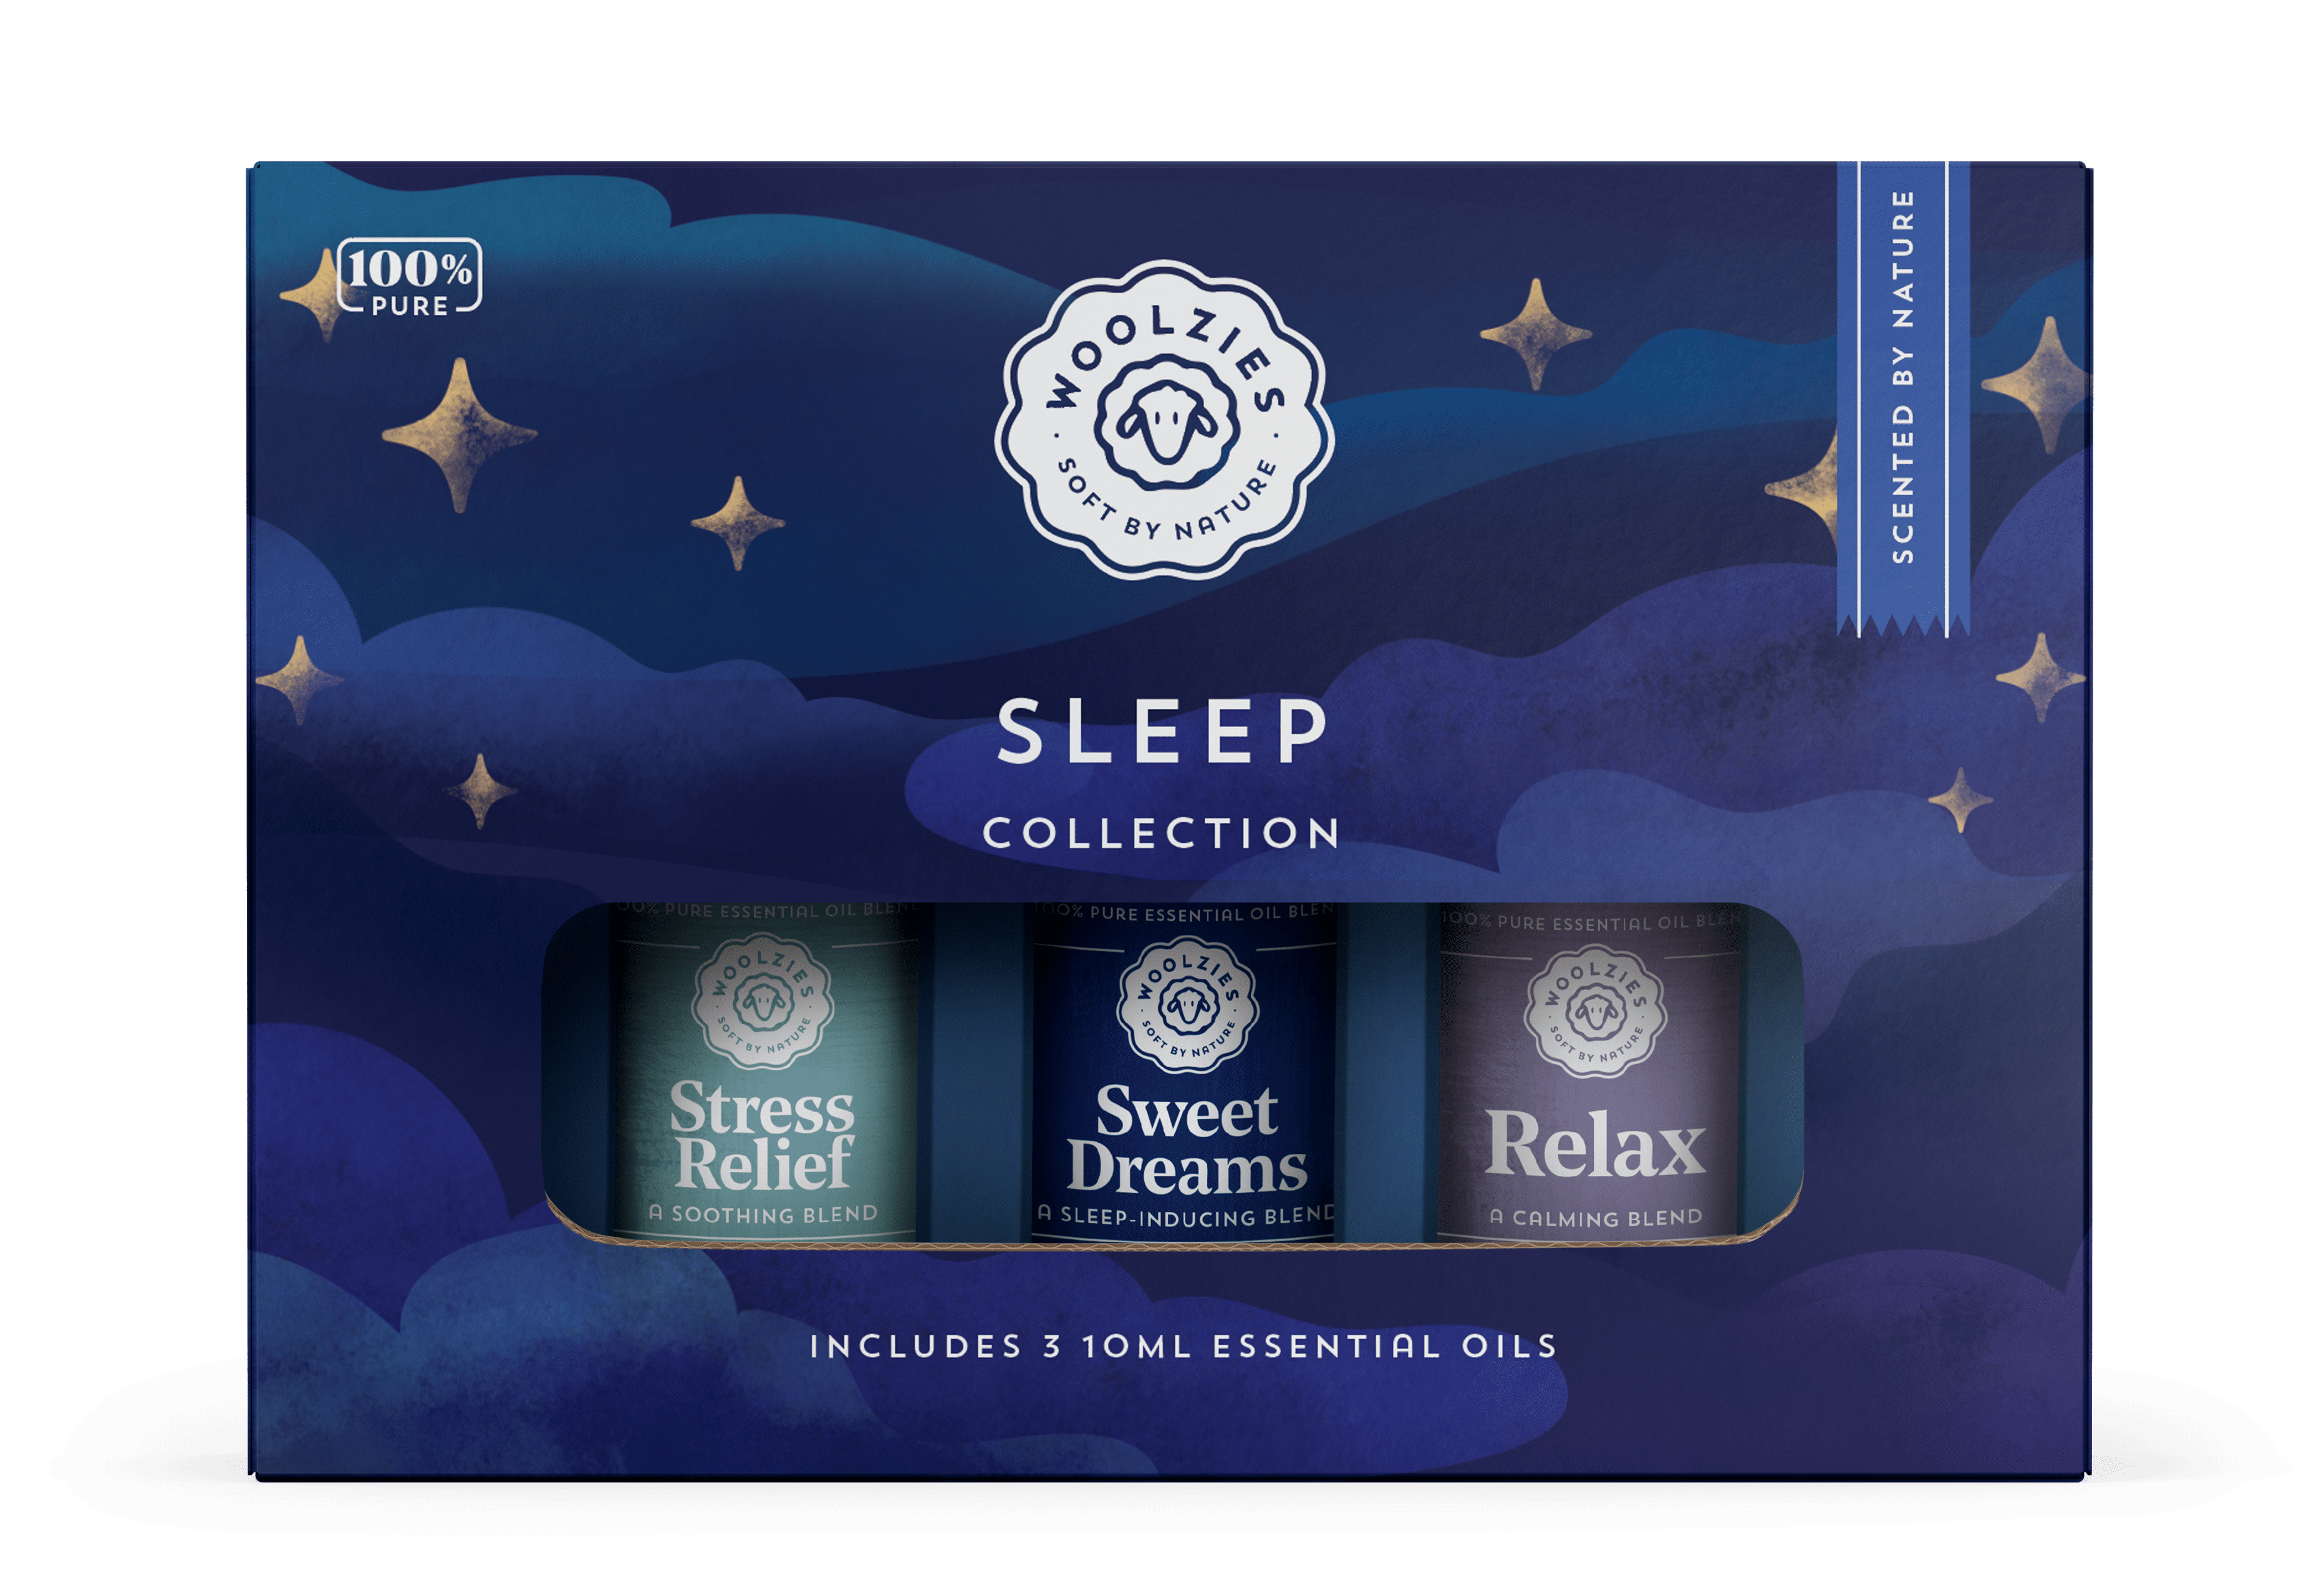 Woolzies 100% Pure Good Night Sleep Well Essential oil Blend set | Helps Sleep Faster & Restful| Sweet Dreams Oils for Insomnia |Natural Sleep Aid |Helps Stress,Undiluted Therapeutic Grade - Walmart.com